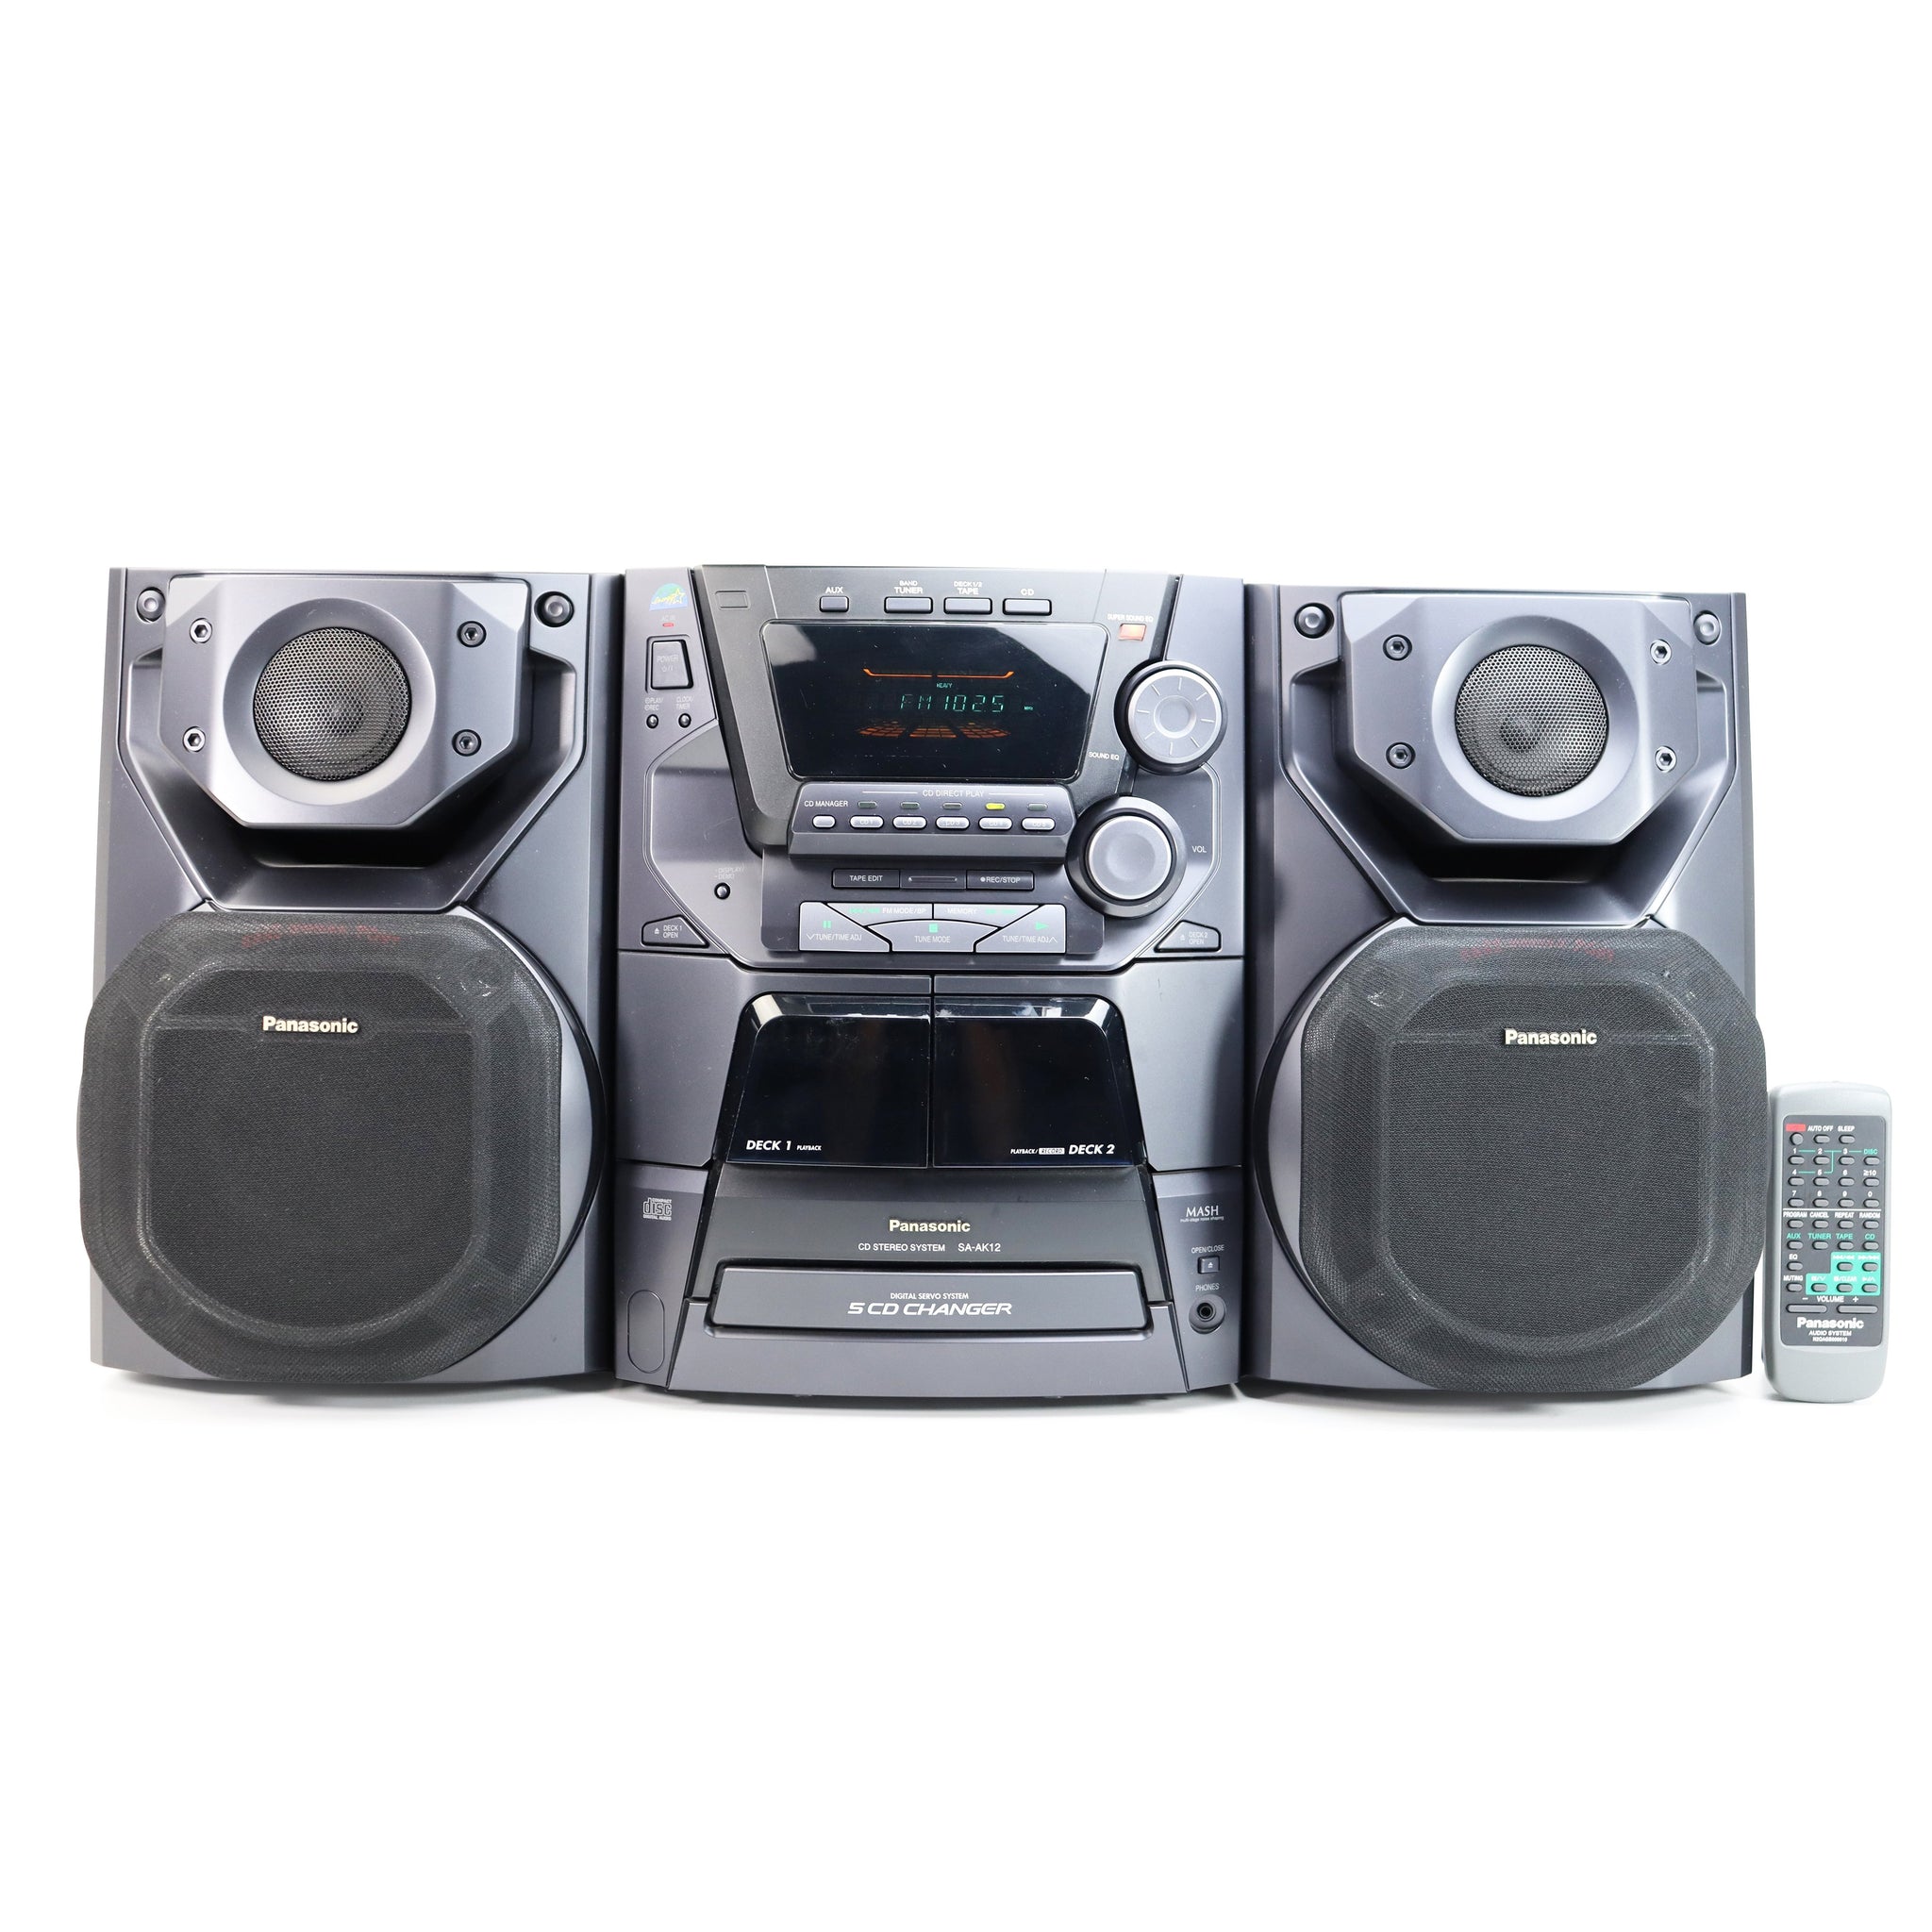 Panasonic SA-AK27 5-Disc CD Changer System with Speakers